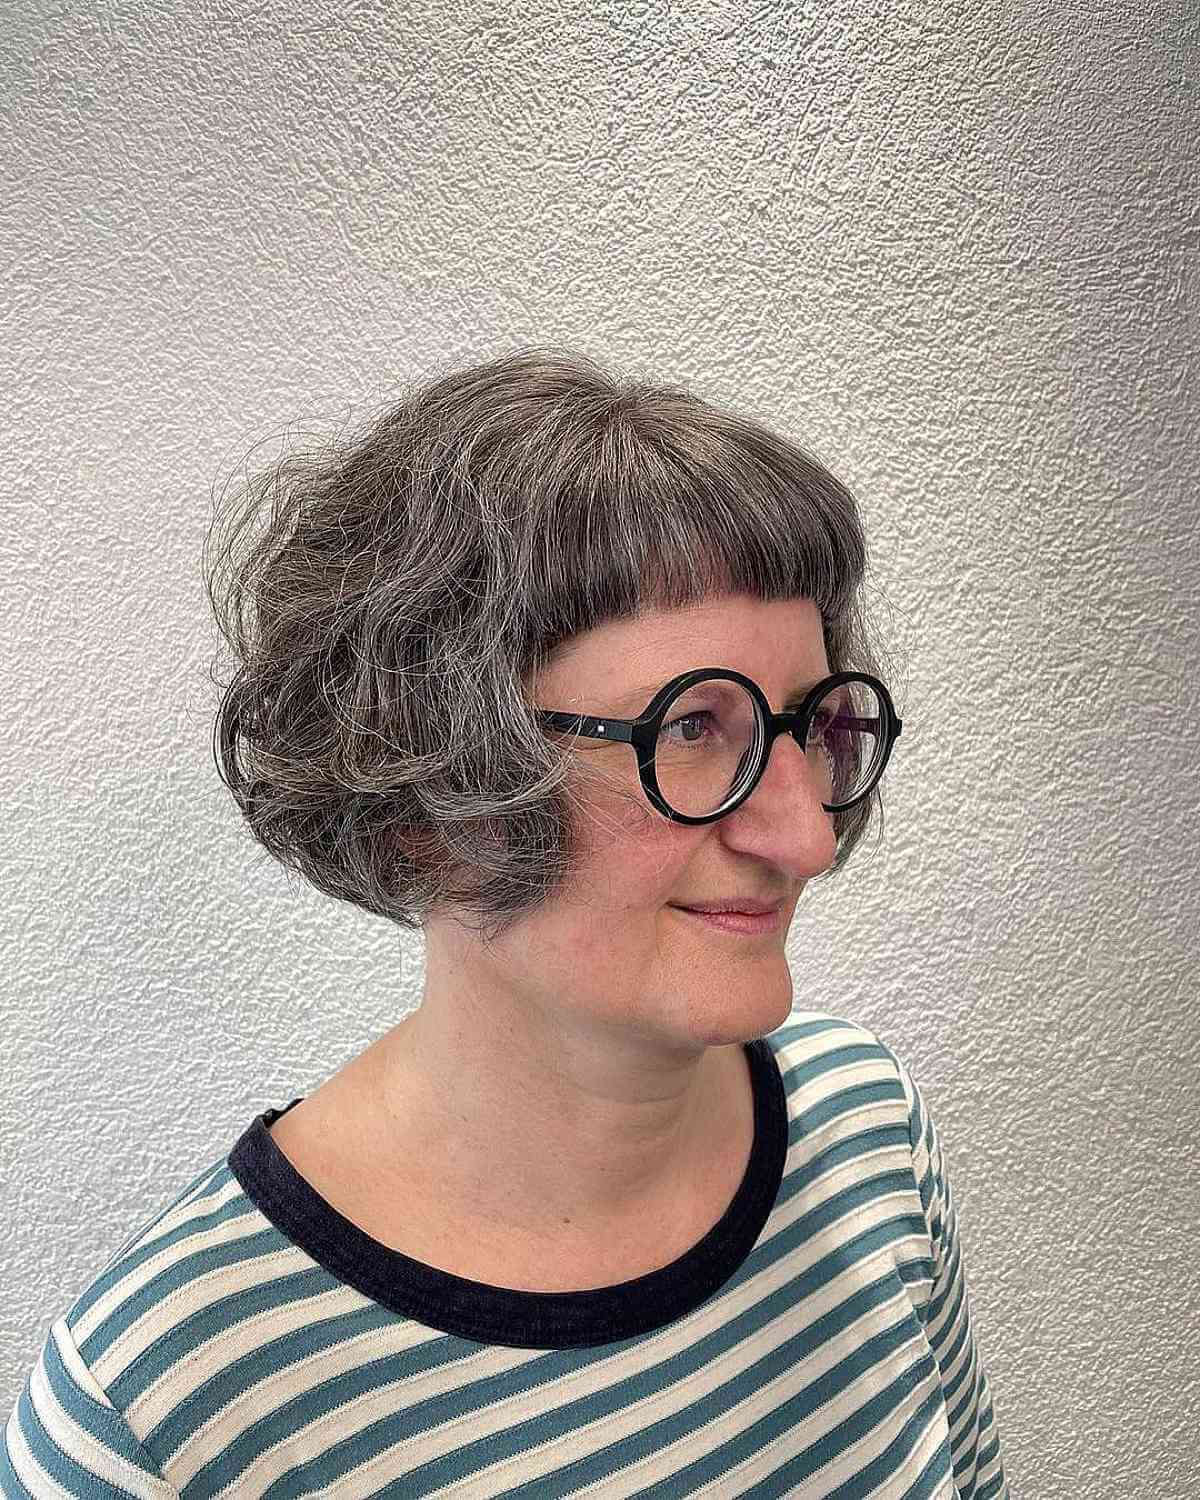 Tousled Ear-Length Cut with Short Bangs for 60-Year-Old Women